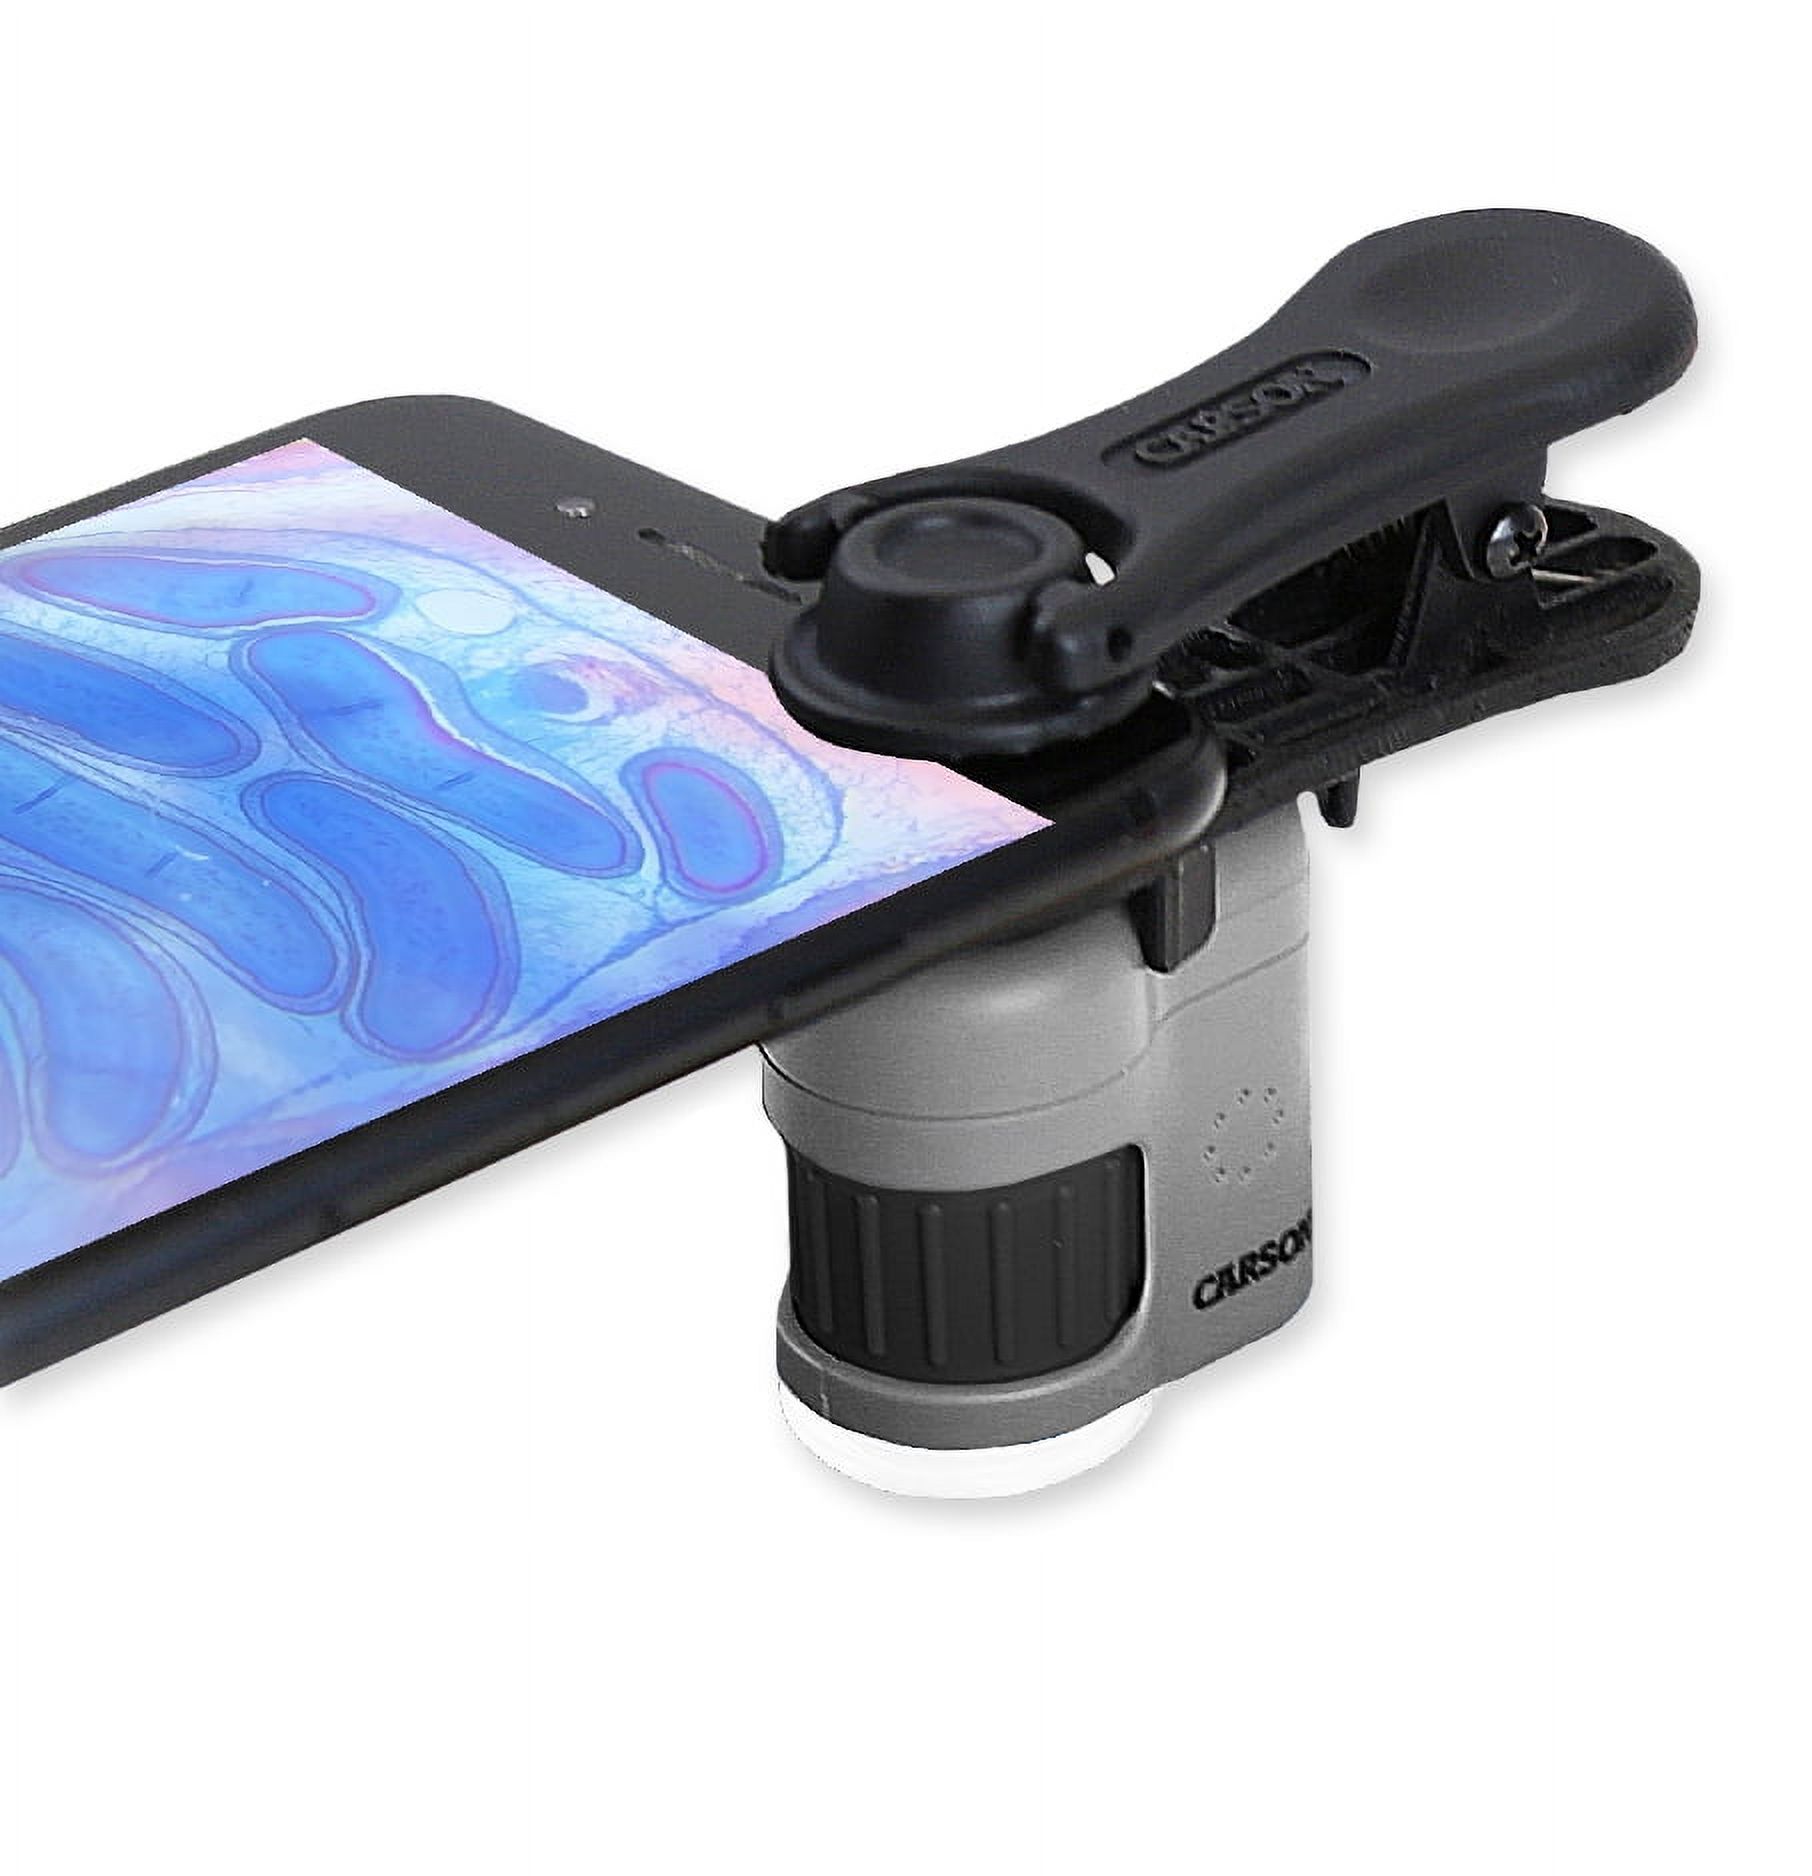 Carson MicroMini™ 20x LED Pocket Microscope with Universal Smartphone Clip - image 1 of 10